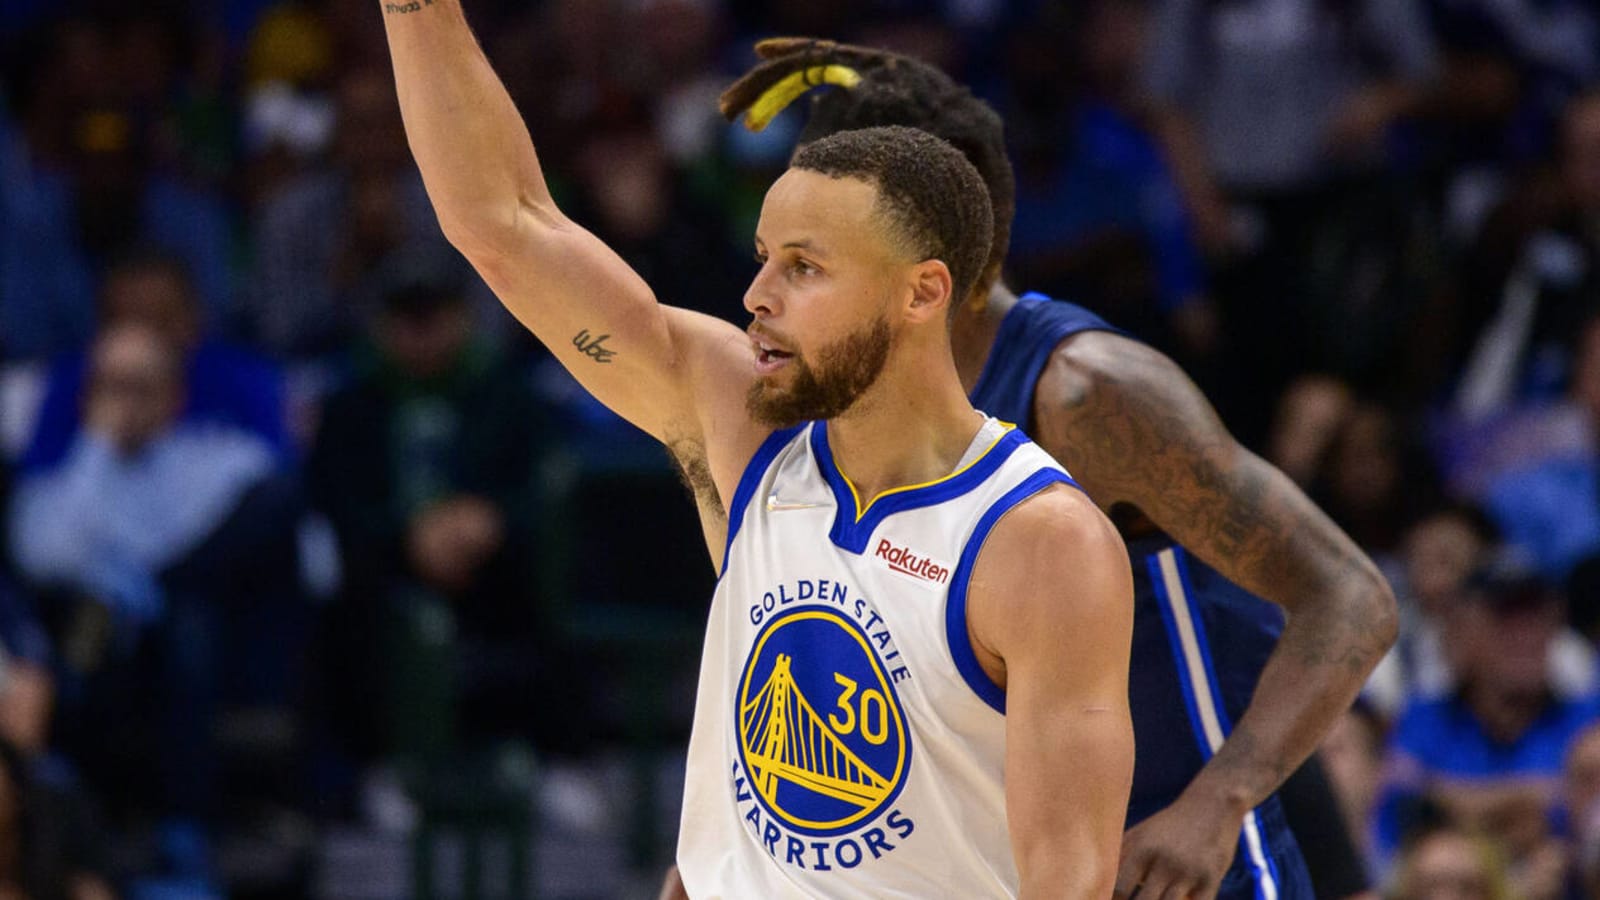 Warriors take Game 3; move one win away from NBA Finals